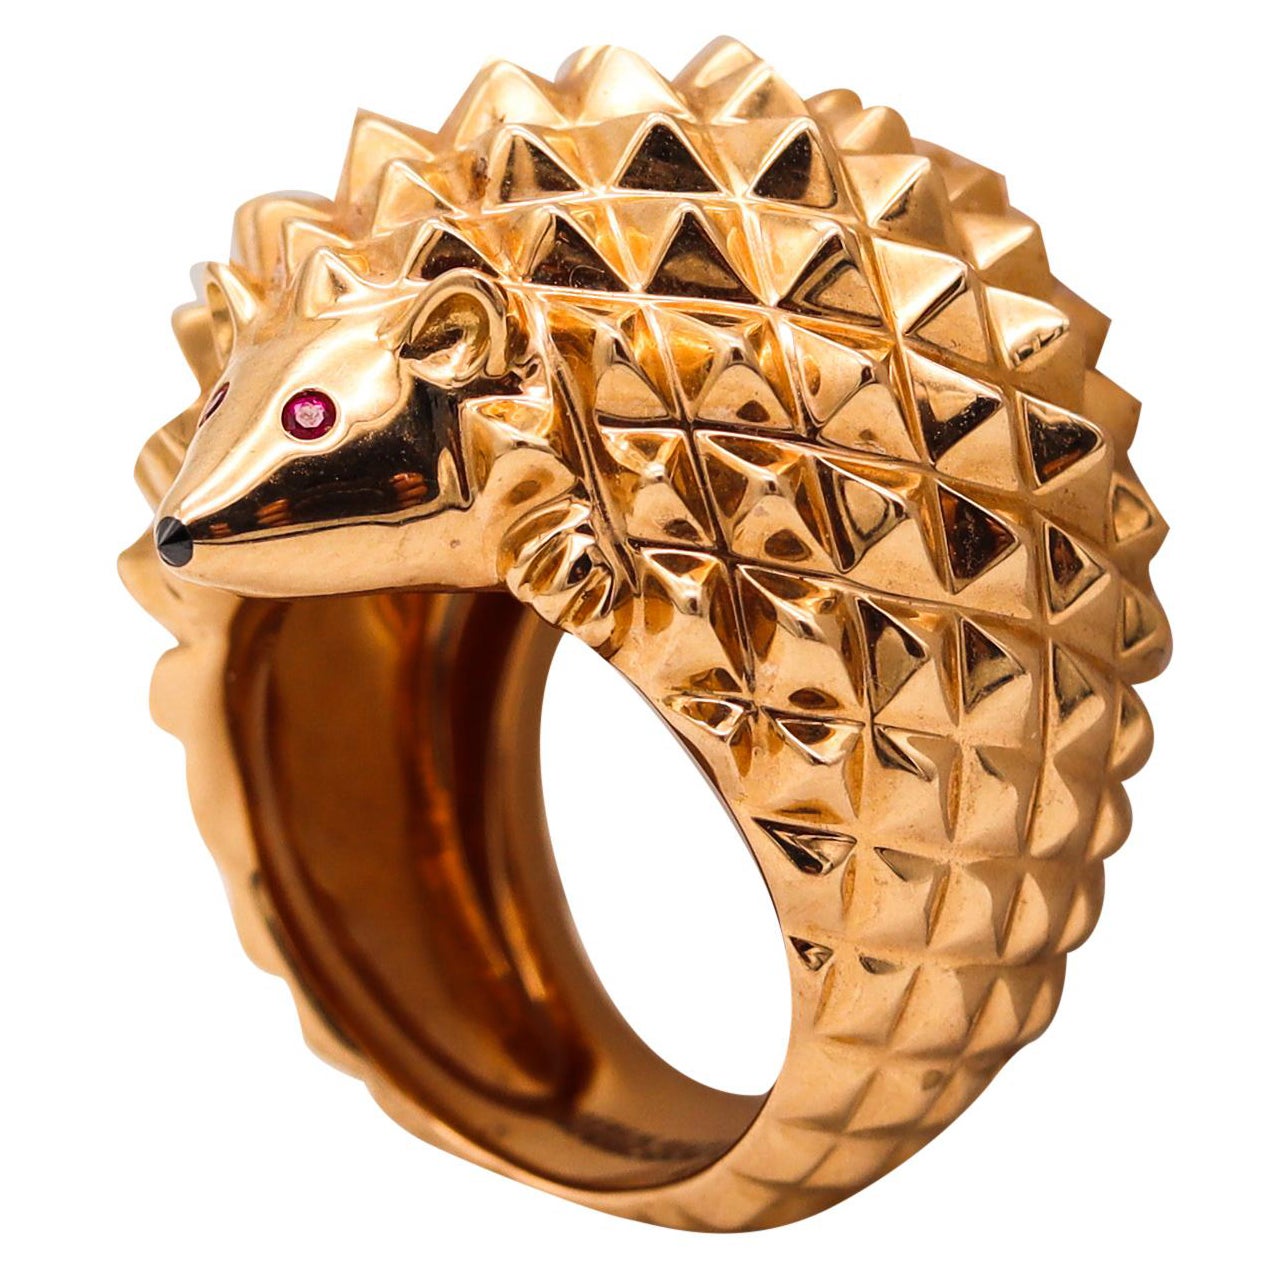 Boucheron Paris Rare Textured Porcupine Ring In 18Kt Yellow Gold With Two Rubies